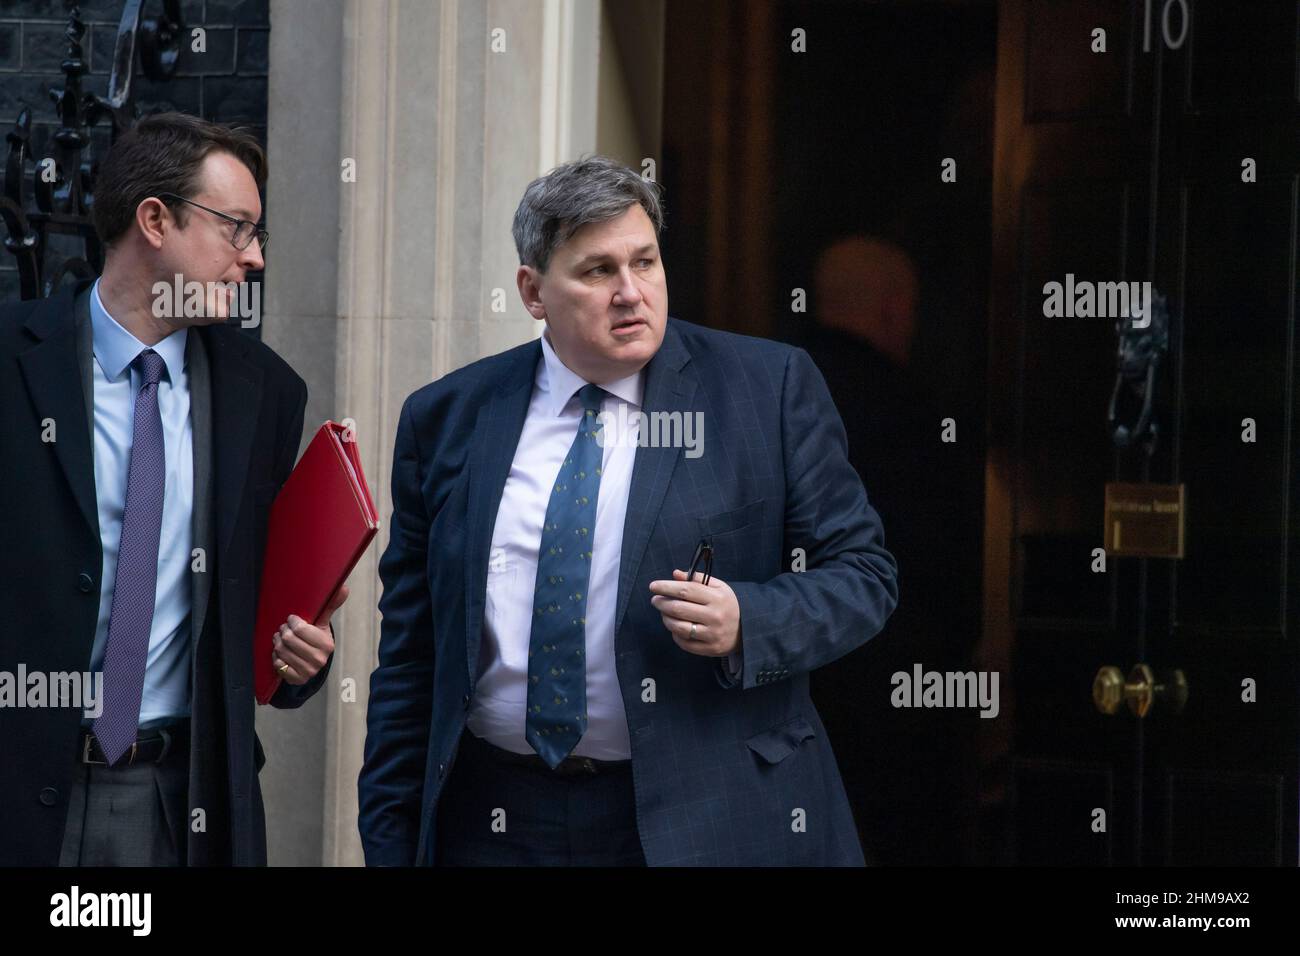 Downing Street, London, UK. 8th Feb, 2022. Kit Malthouse MP, Minister of State, Minister for Crime and Policing leaves 10 Downing Street with Simon Clarke MP after weekly cabinet meeting. Credit: Malcolm Park/Alamy Live News Stock Photo